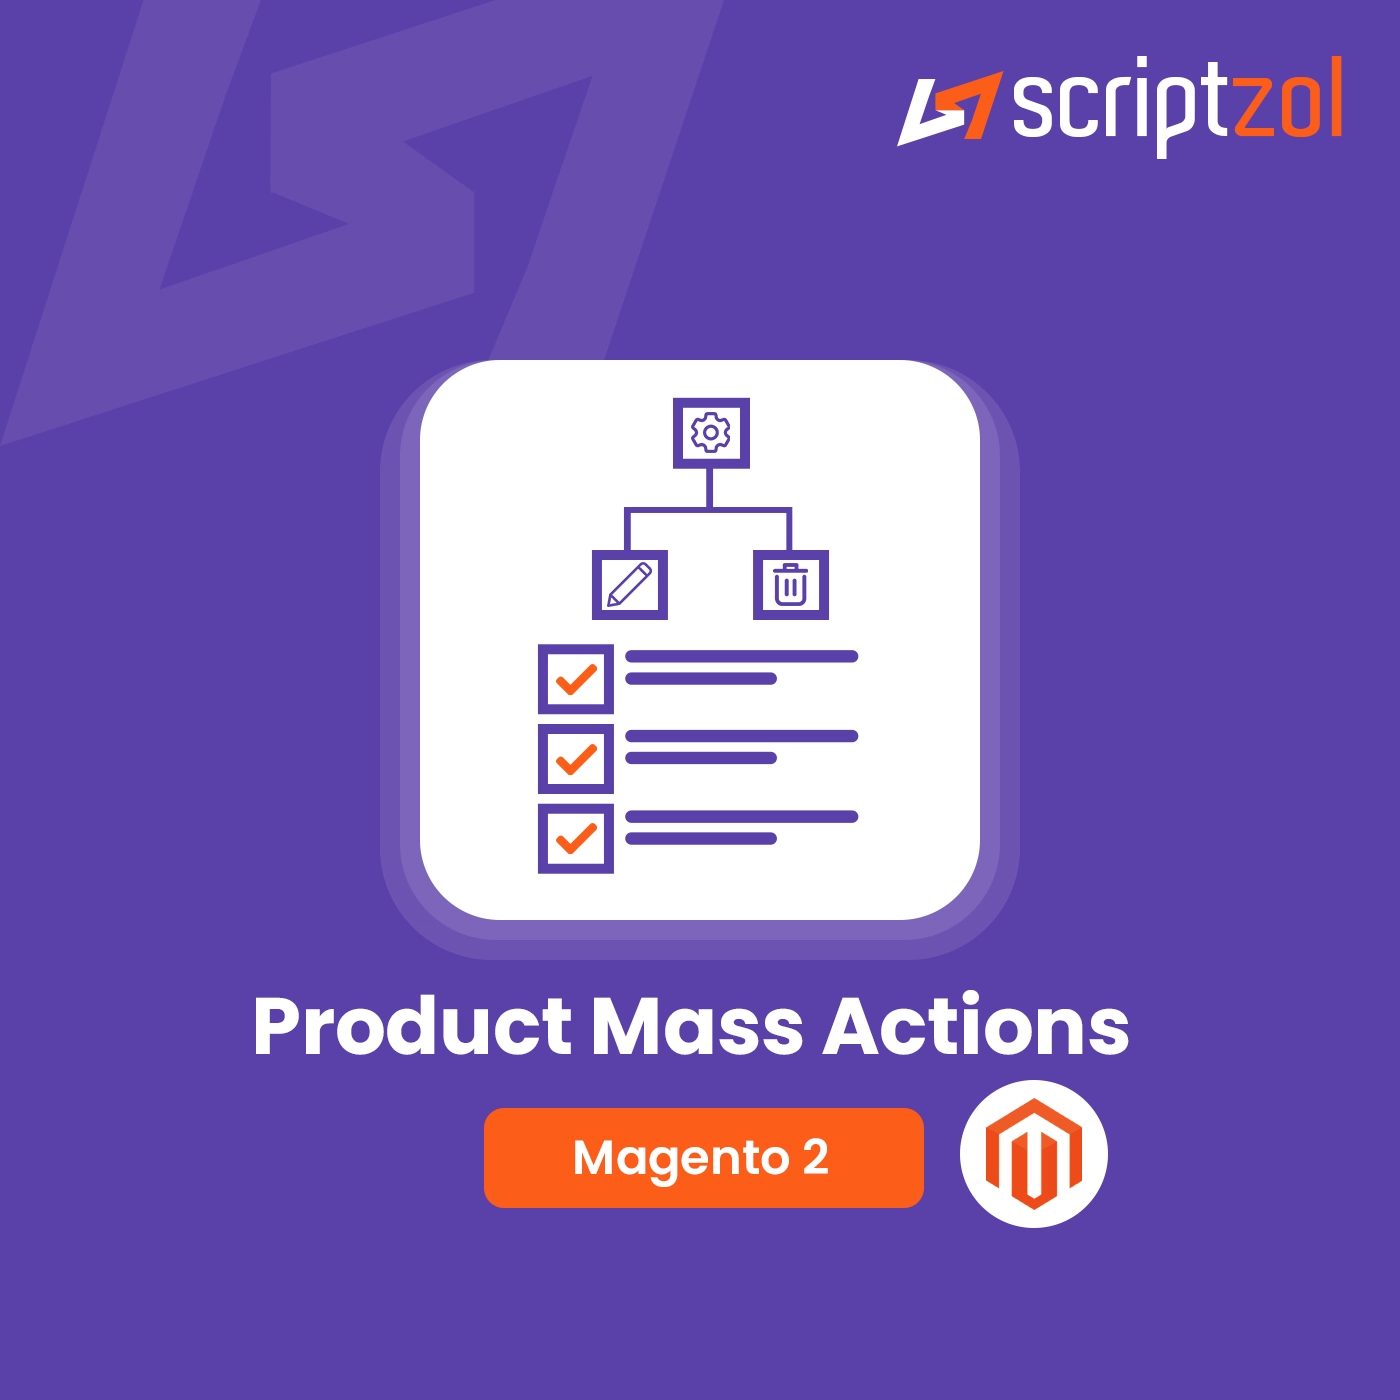 https://www.scriptzol.com/assets/img/product/magento-2-product-mass-actions.webp